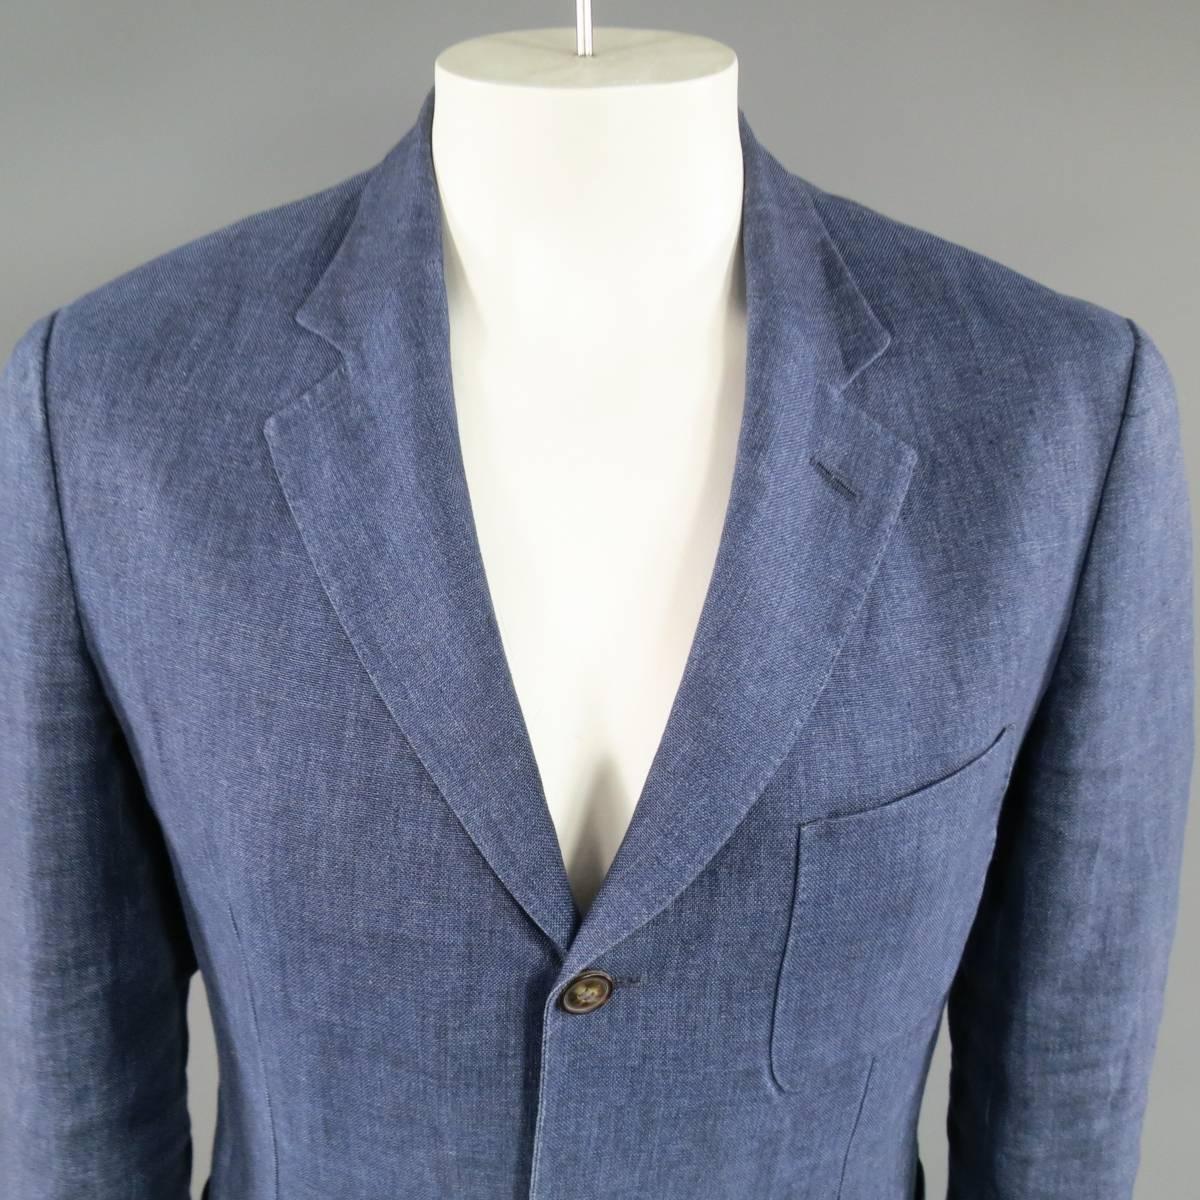 LORO PIANA Sport Coat consists of linen material in a indigo color tone. Designed in a notch lapel collar, 3-button front and bottom patch pockets. Detailed with a top patch pocket, 4-button cuff and double back vent. Unconstructed lining.